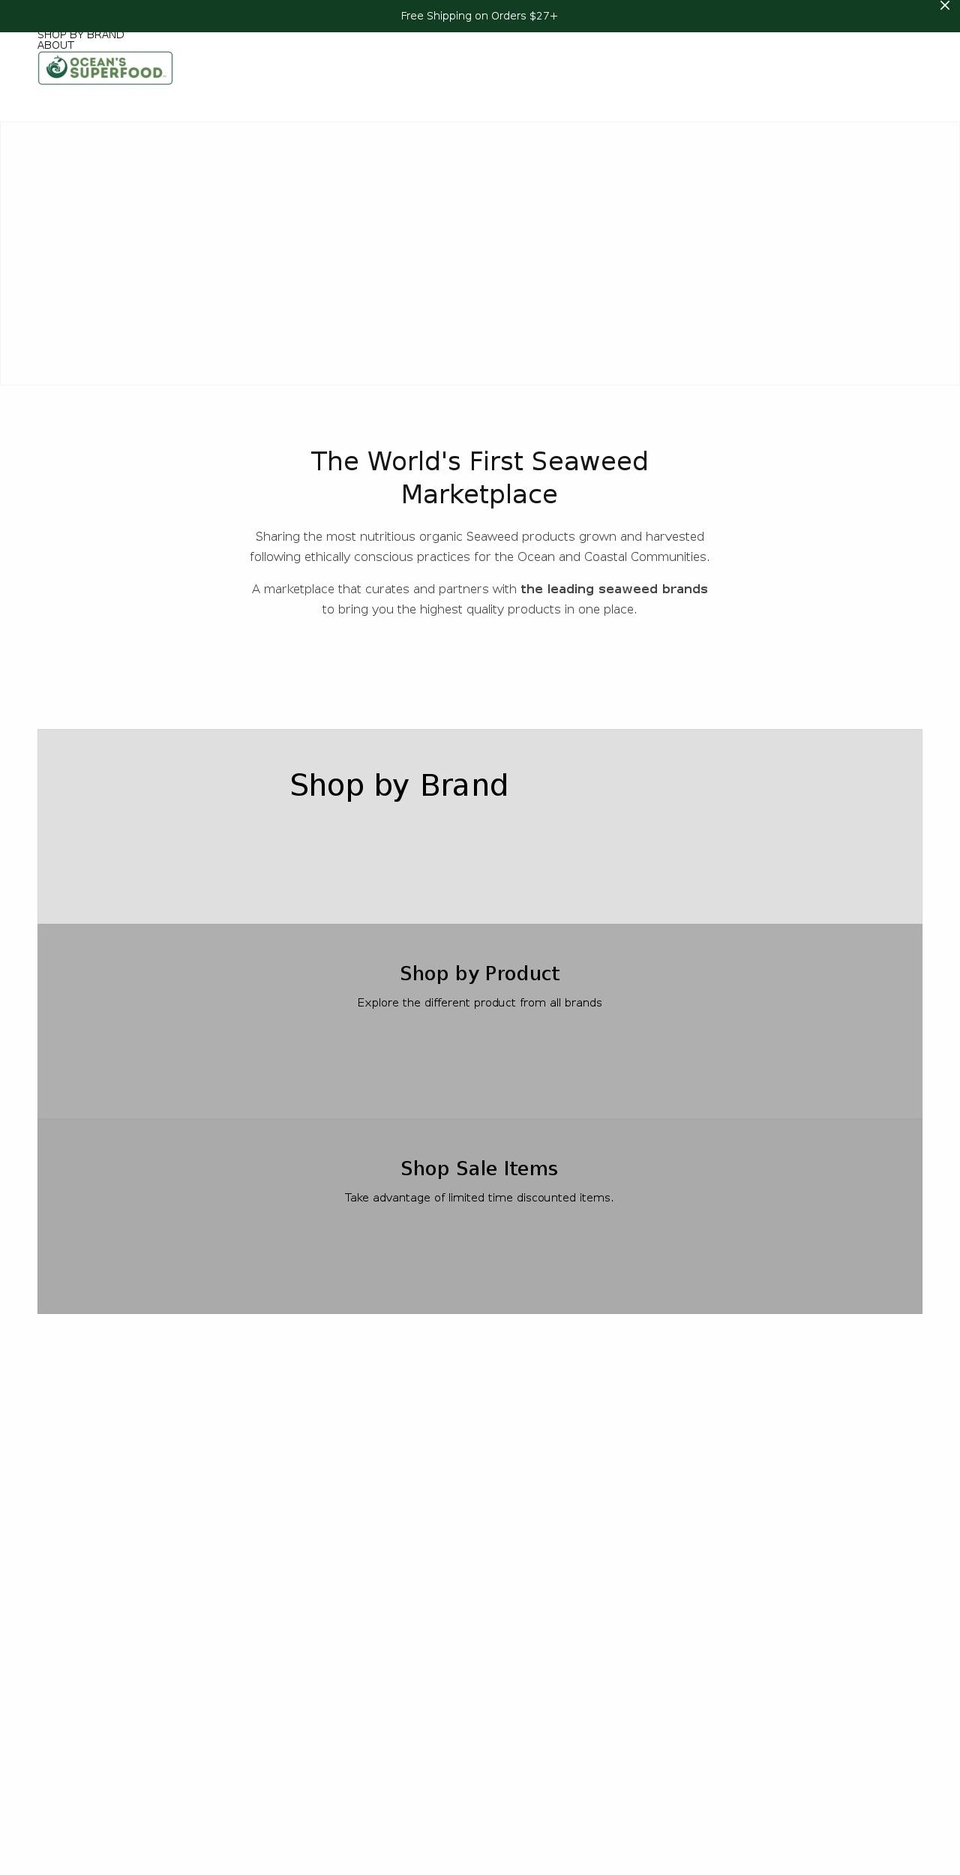 North Shopify theme site example oceansuperfood.com